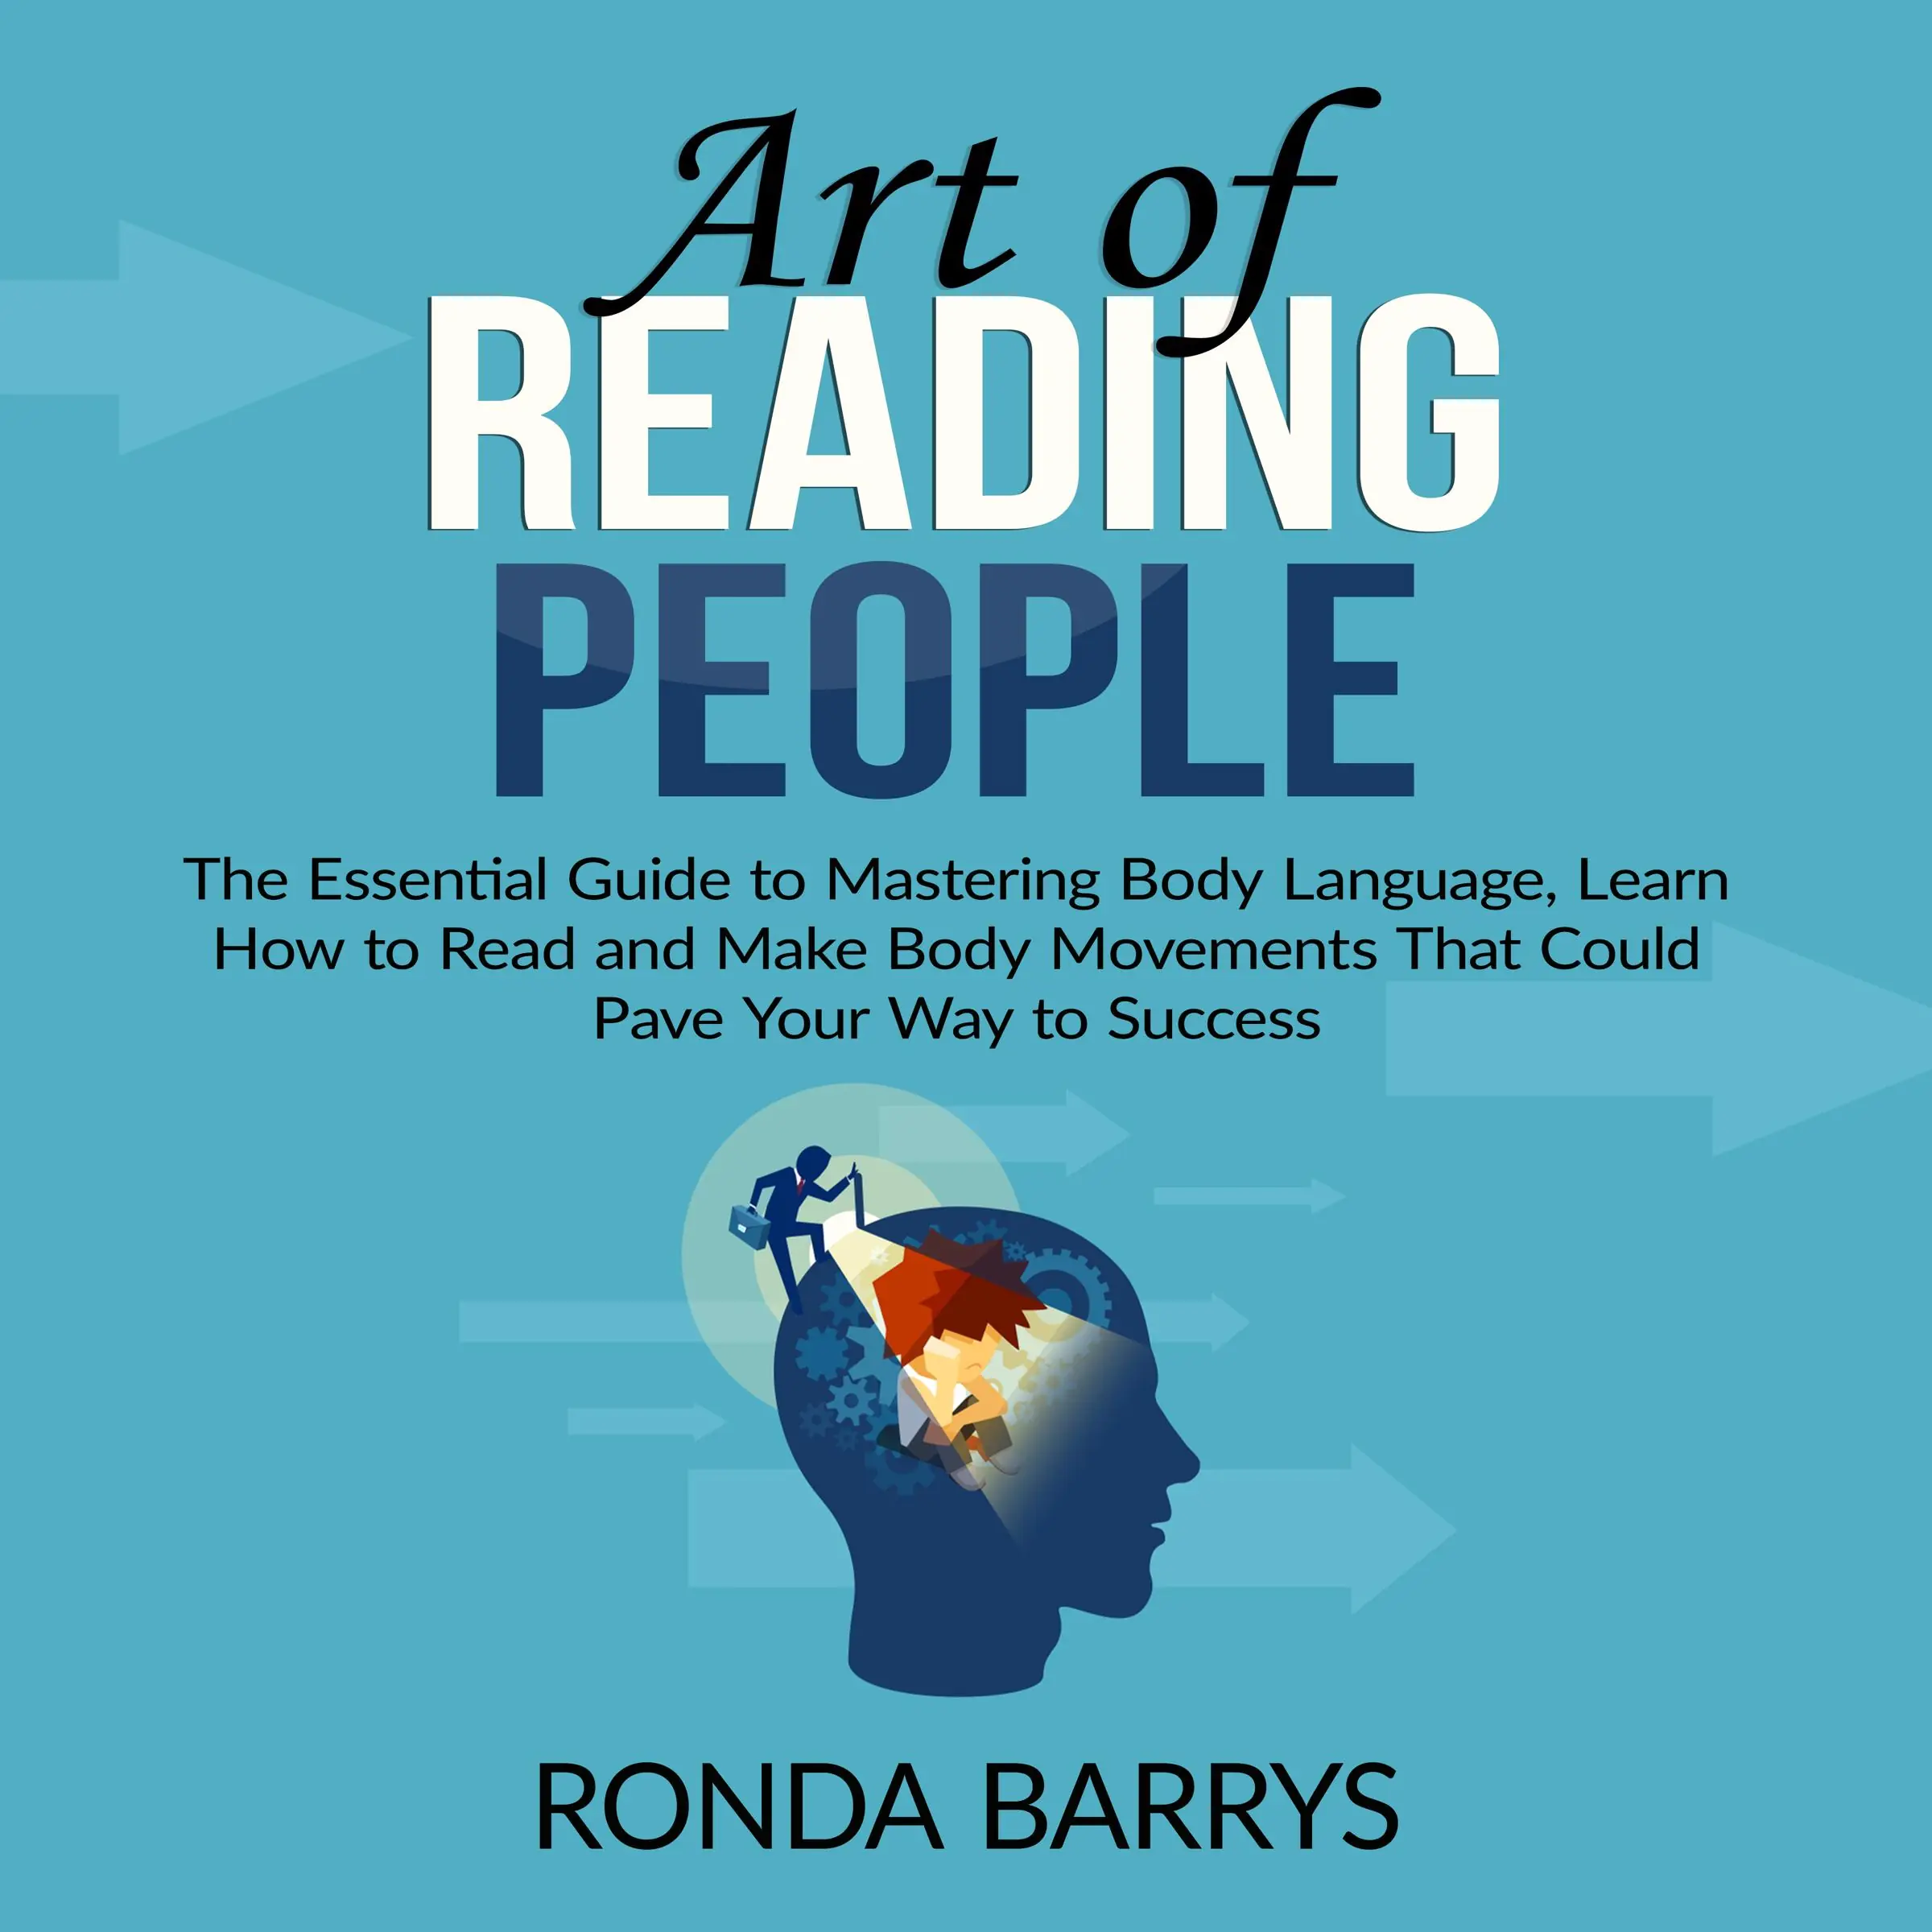 Art of Reading People: The Essential Guide to Mastering Body Language, Learn How to Read and Make Body Movements That Could Pave Your Way to Success Audiobook by Ronda Barrys